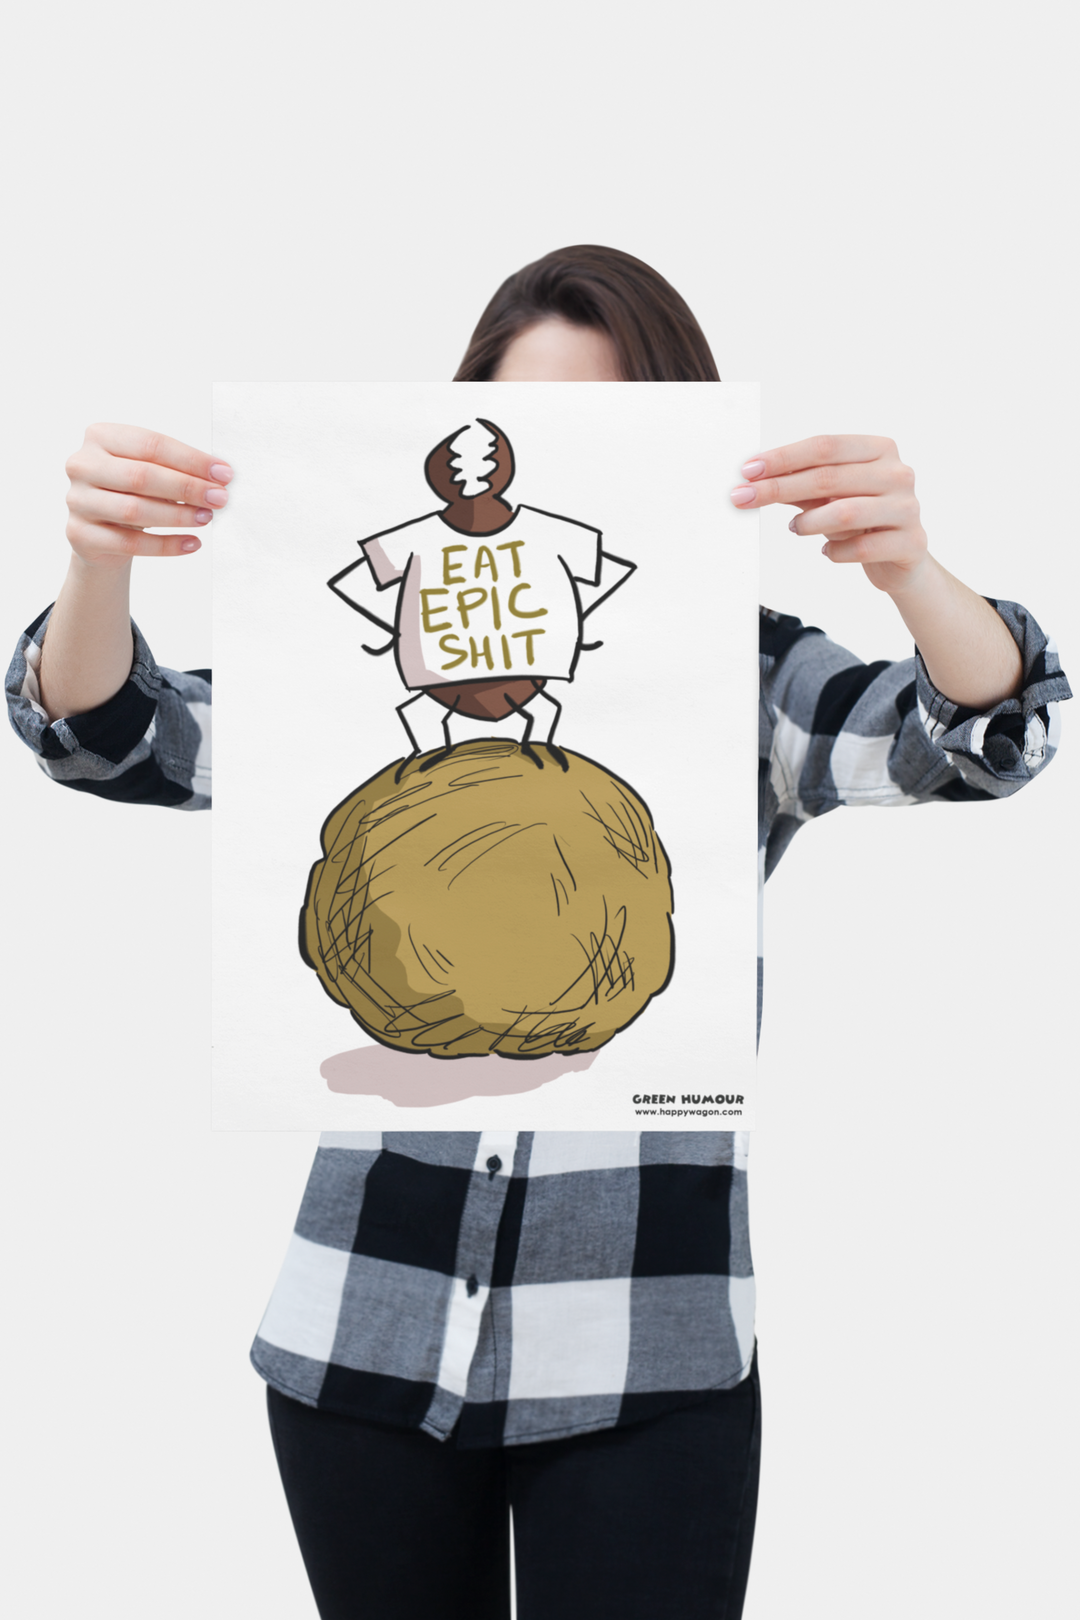 Eat Epic Shit (Dung Beetle) Non-Tearable Poster